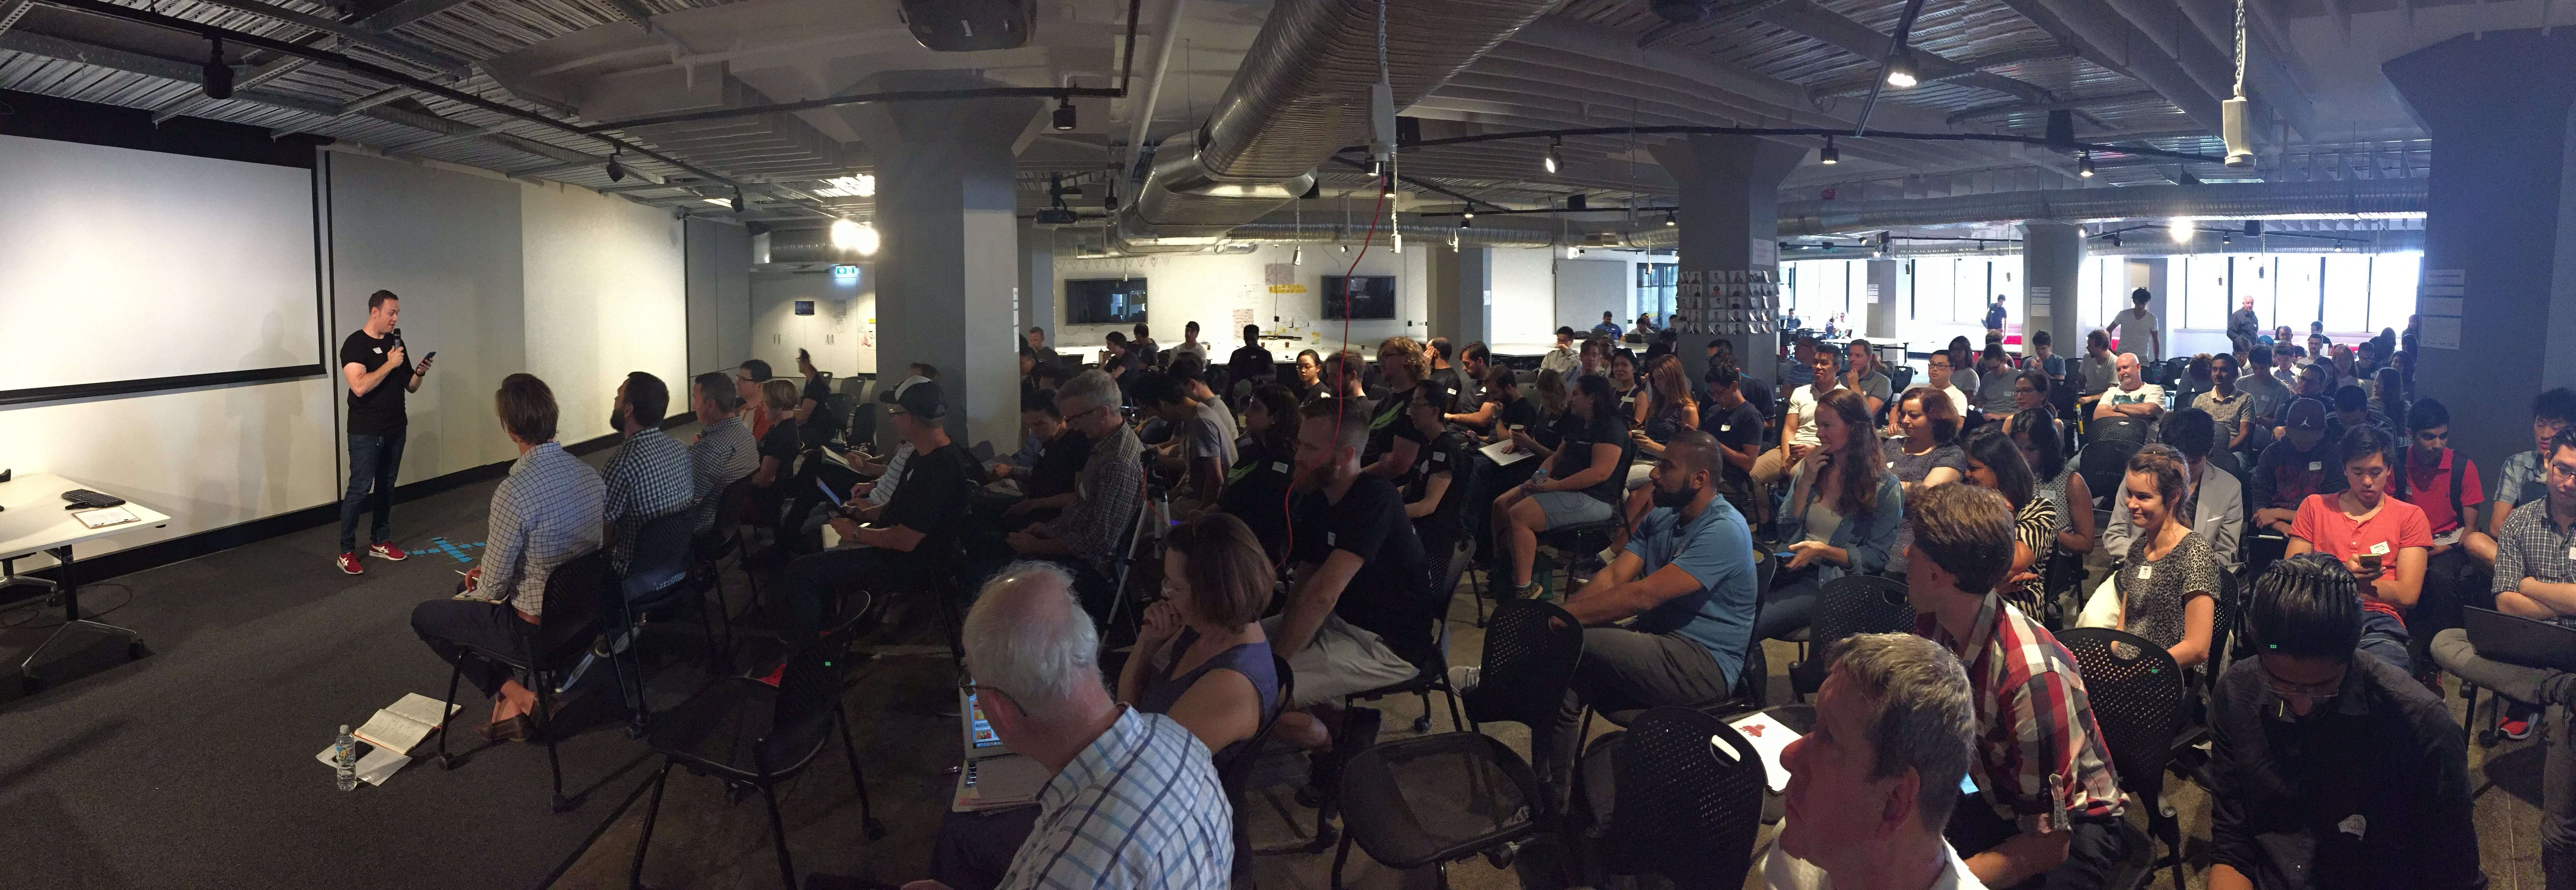 Panorama image of the CongestionHack pitching session